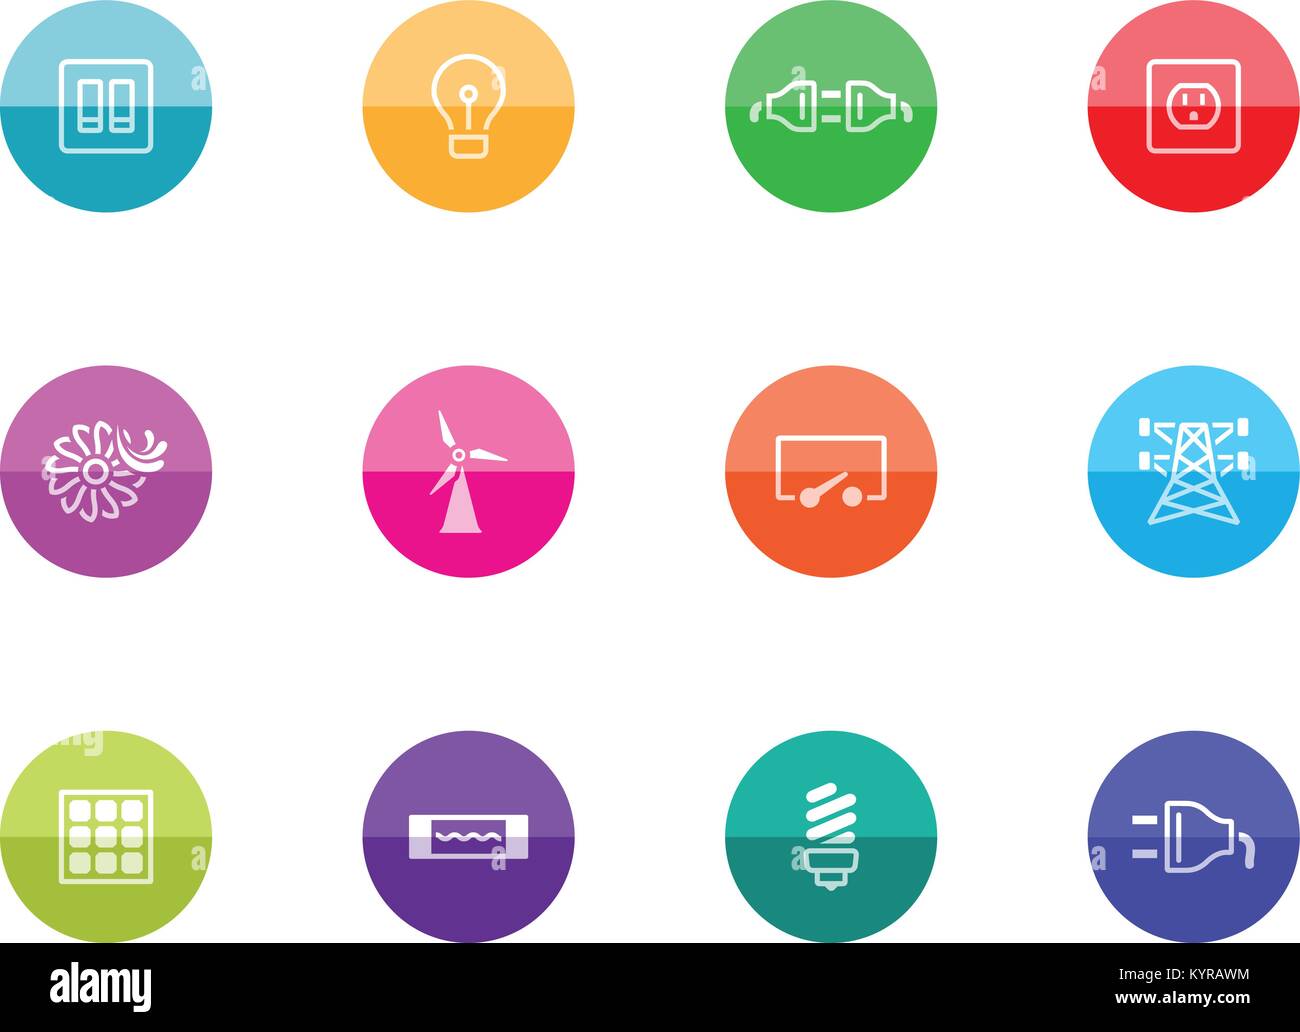 Electricity icons in color circles. Vector illustration. Stock Vector